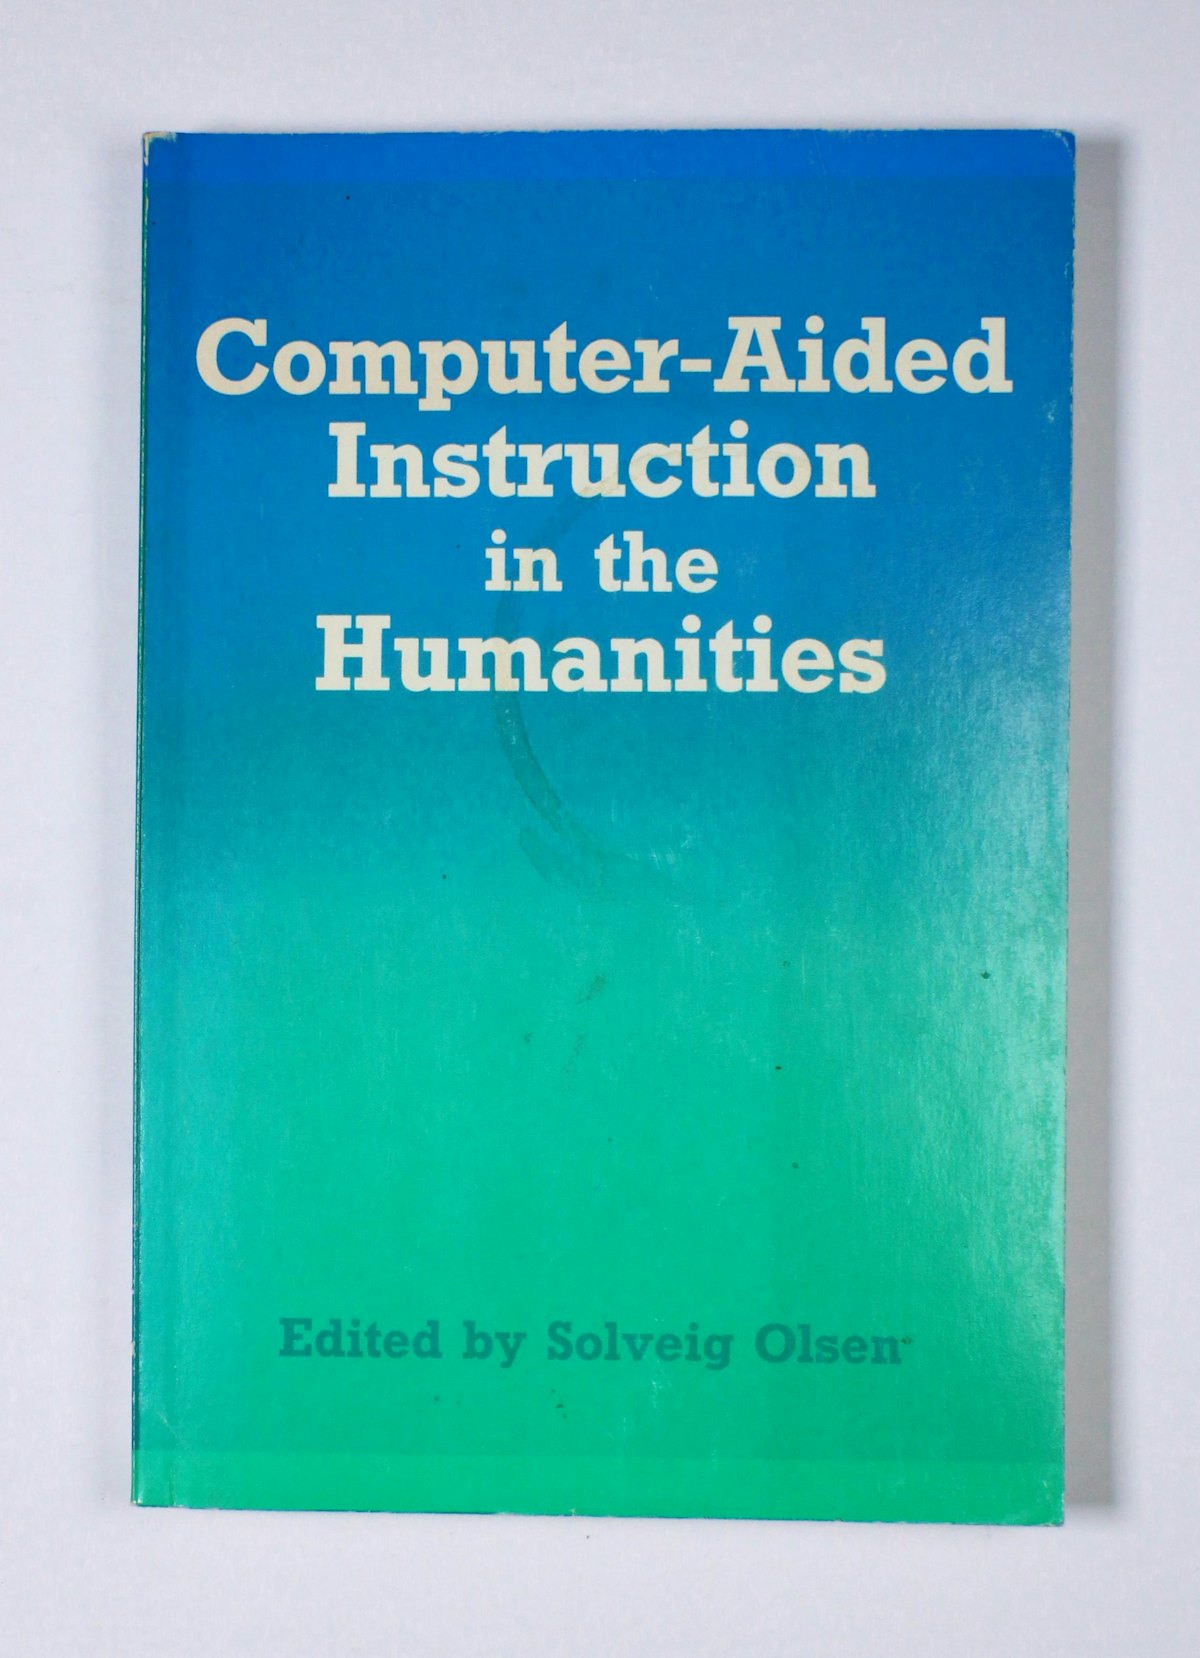 Computer-Aided Instruction in the Humanities